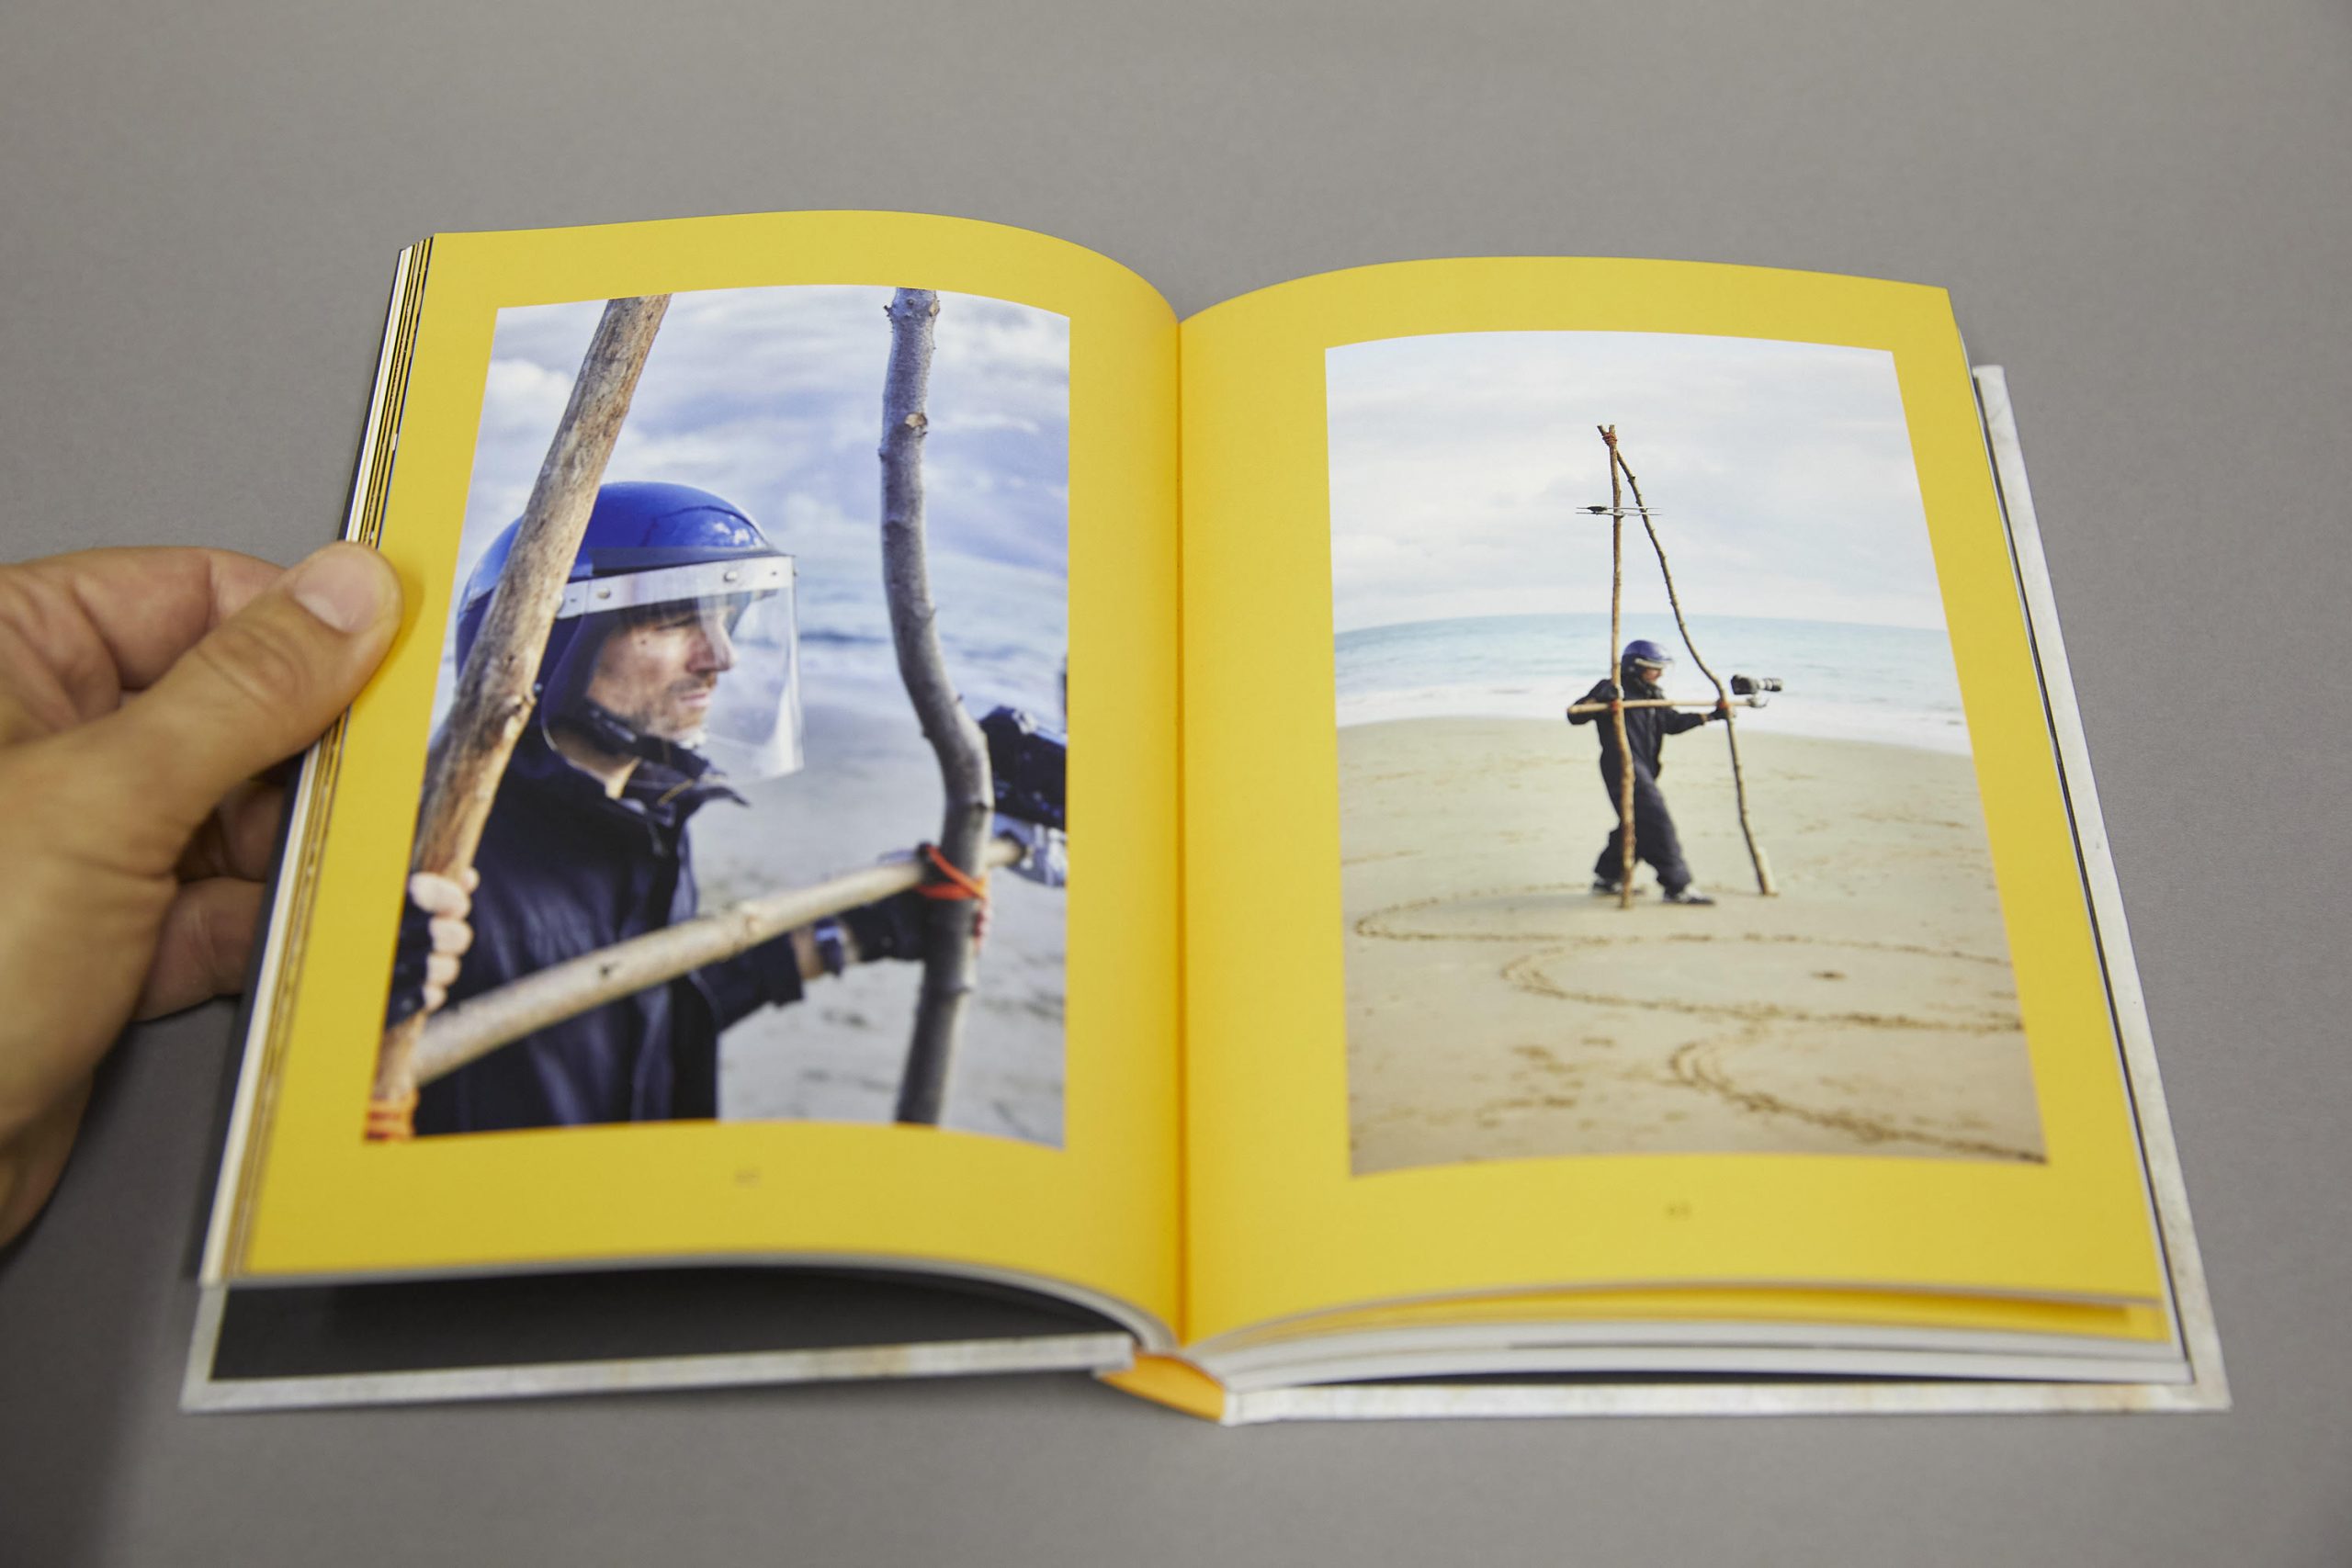 Photo of the book Unframing Photography on a grey surface with a hand flicking through it. The two pages we see feature two large photos surrounded by yellow frames. The photos depict a white man, wearing workwear and a blue helmet and using a wooden pair of compasses to draw circles on a sandy beach. The pair of compasses has a camera attached to it.